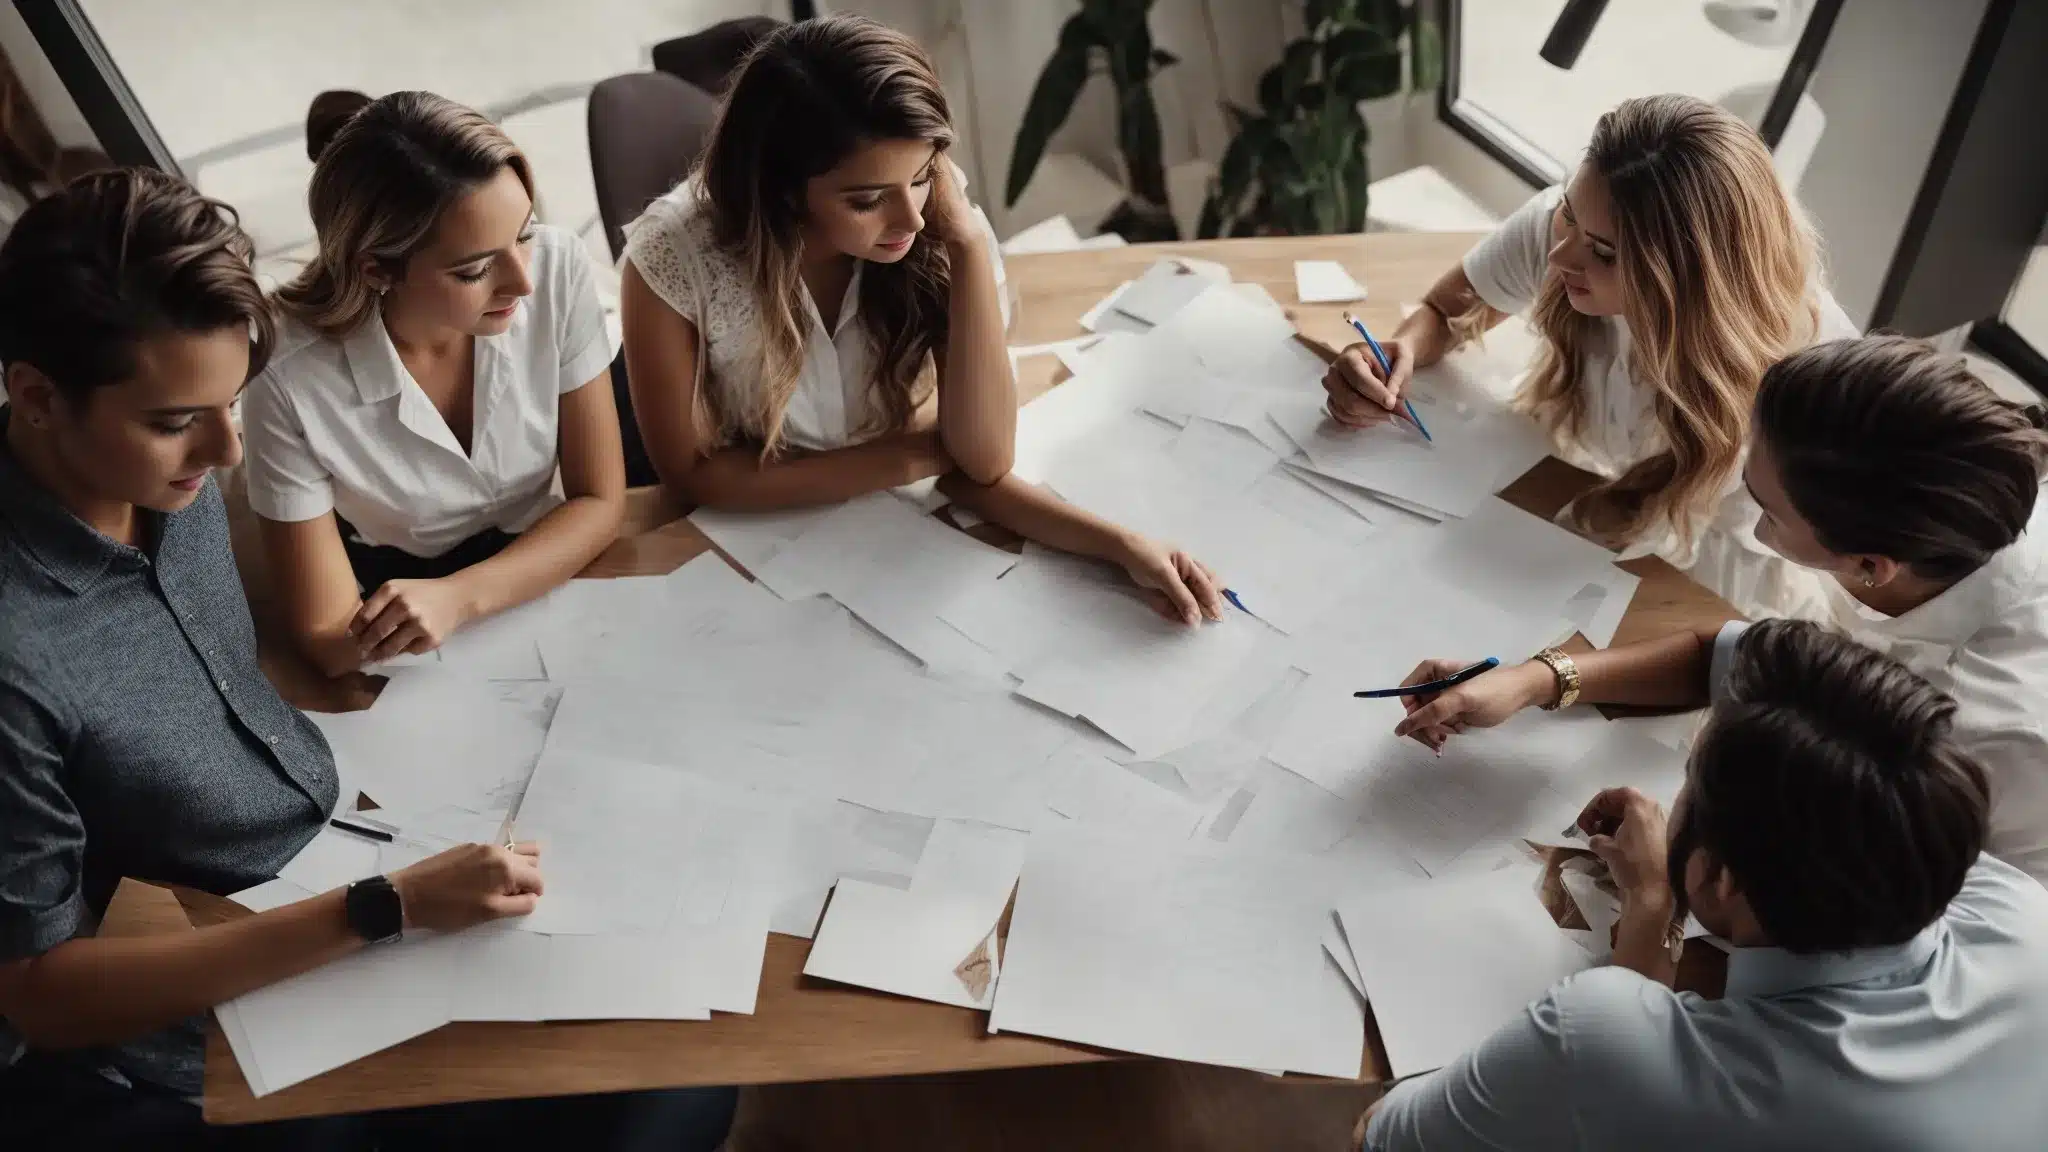 A Marketing Team Gathers Around A Table, Brainstorming Ideas With Various Brand Concept Sketches Laid Out Before Them.